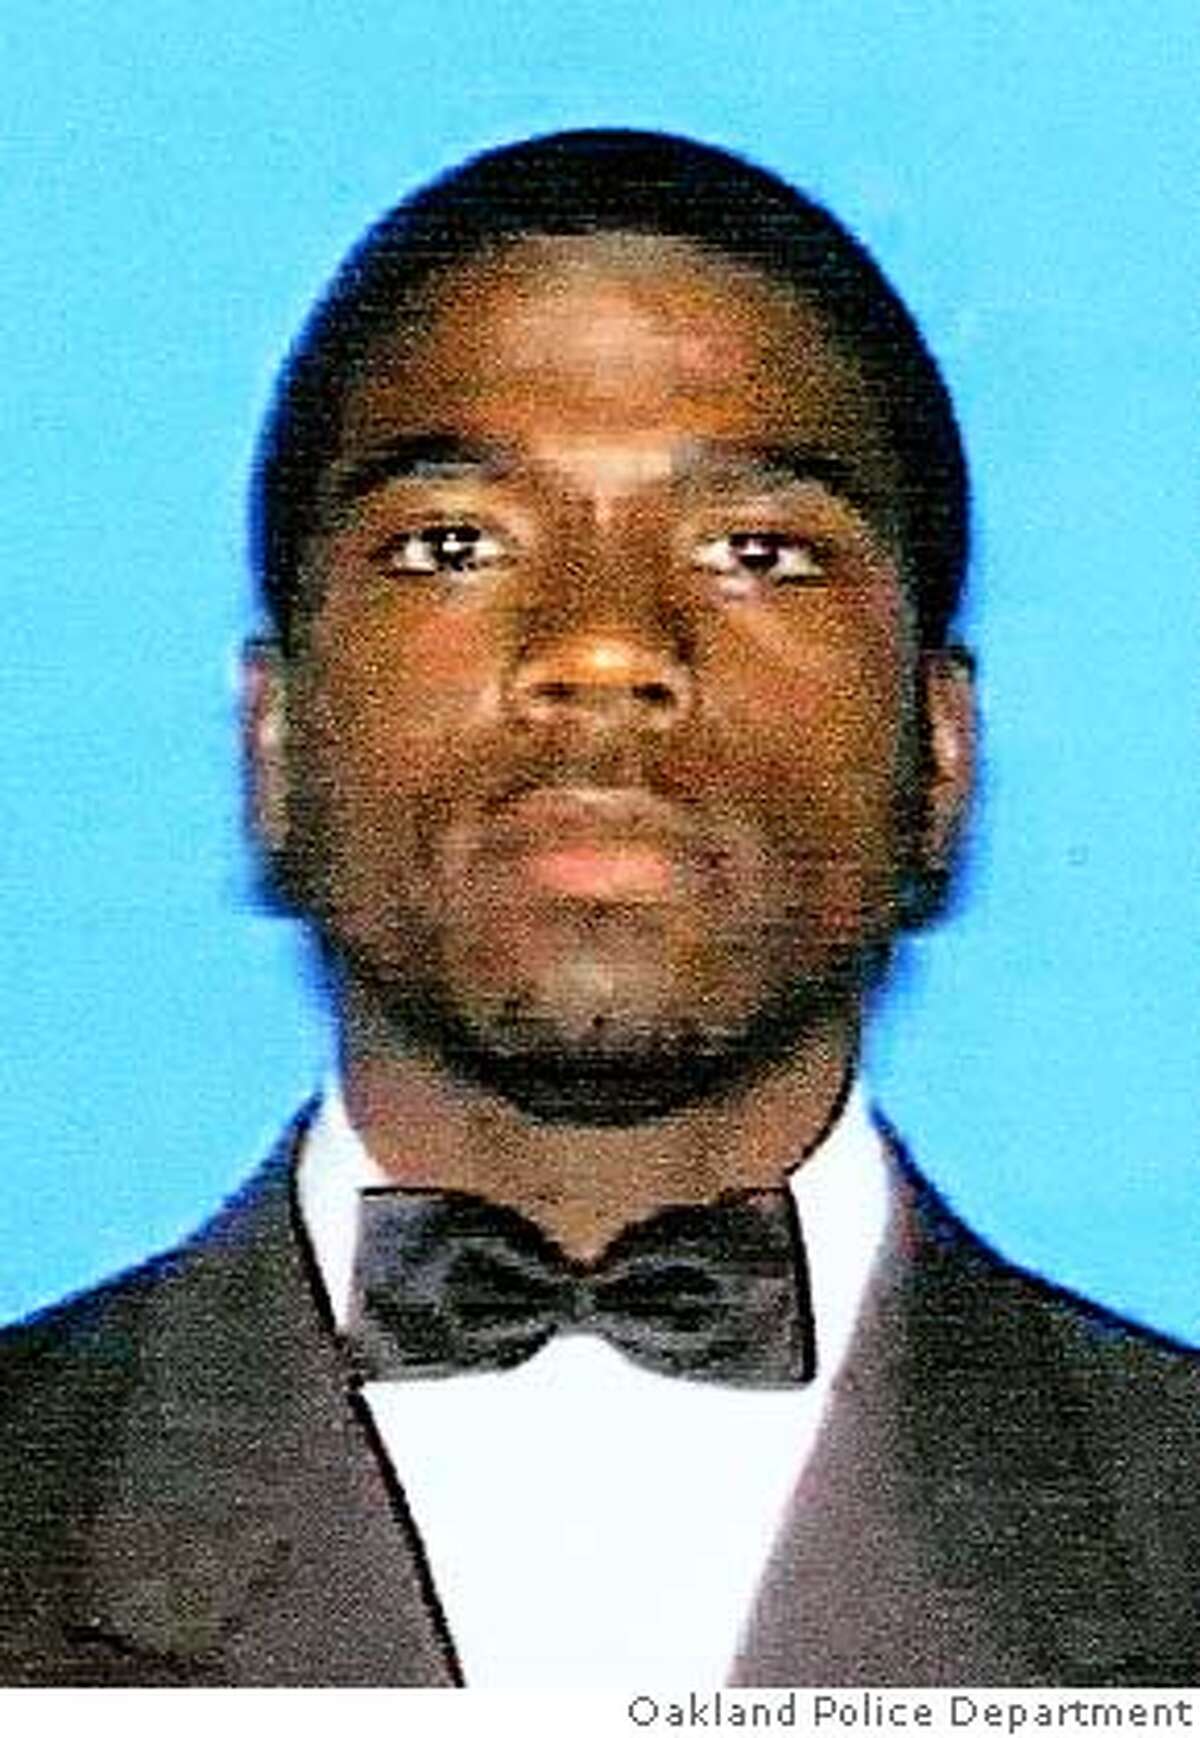 DeVaughndre Broussard, a suspect in the murder of Oakland Post Editor Chaucey Bailey, is seen in this photo provided by The Oakland Police Department. Broussard will be charged with Bailey's murder in the next 24-36 hours, Assistant Police Chief Howard Jordan said. Broussard was one of seven people arrested in raids on Your Black Muslim Bakery and nearby houses on Friday. Aug. 3, 2007, and has confessed to fatally shooting 57-year-old Bailey. (AP Photo/Oakland Police Department via the Oakland Tribune)